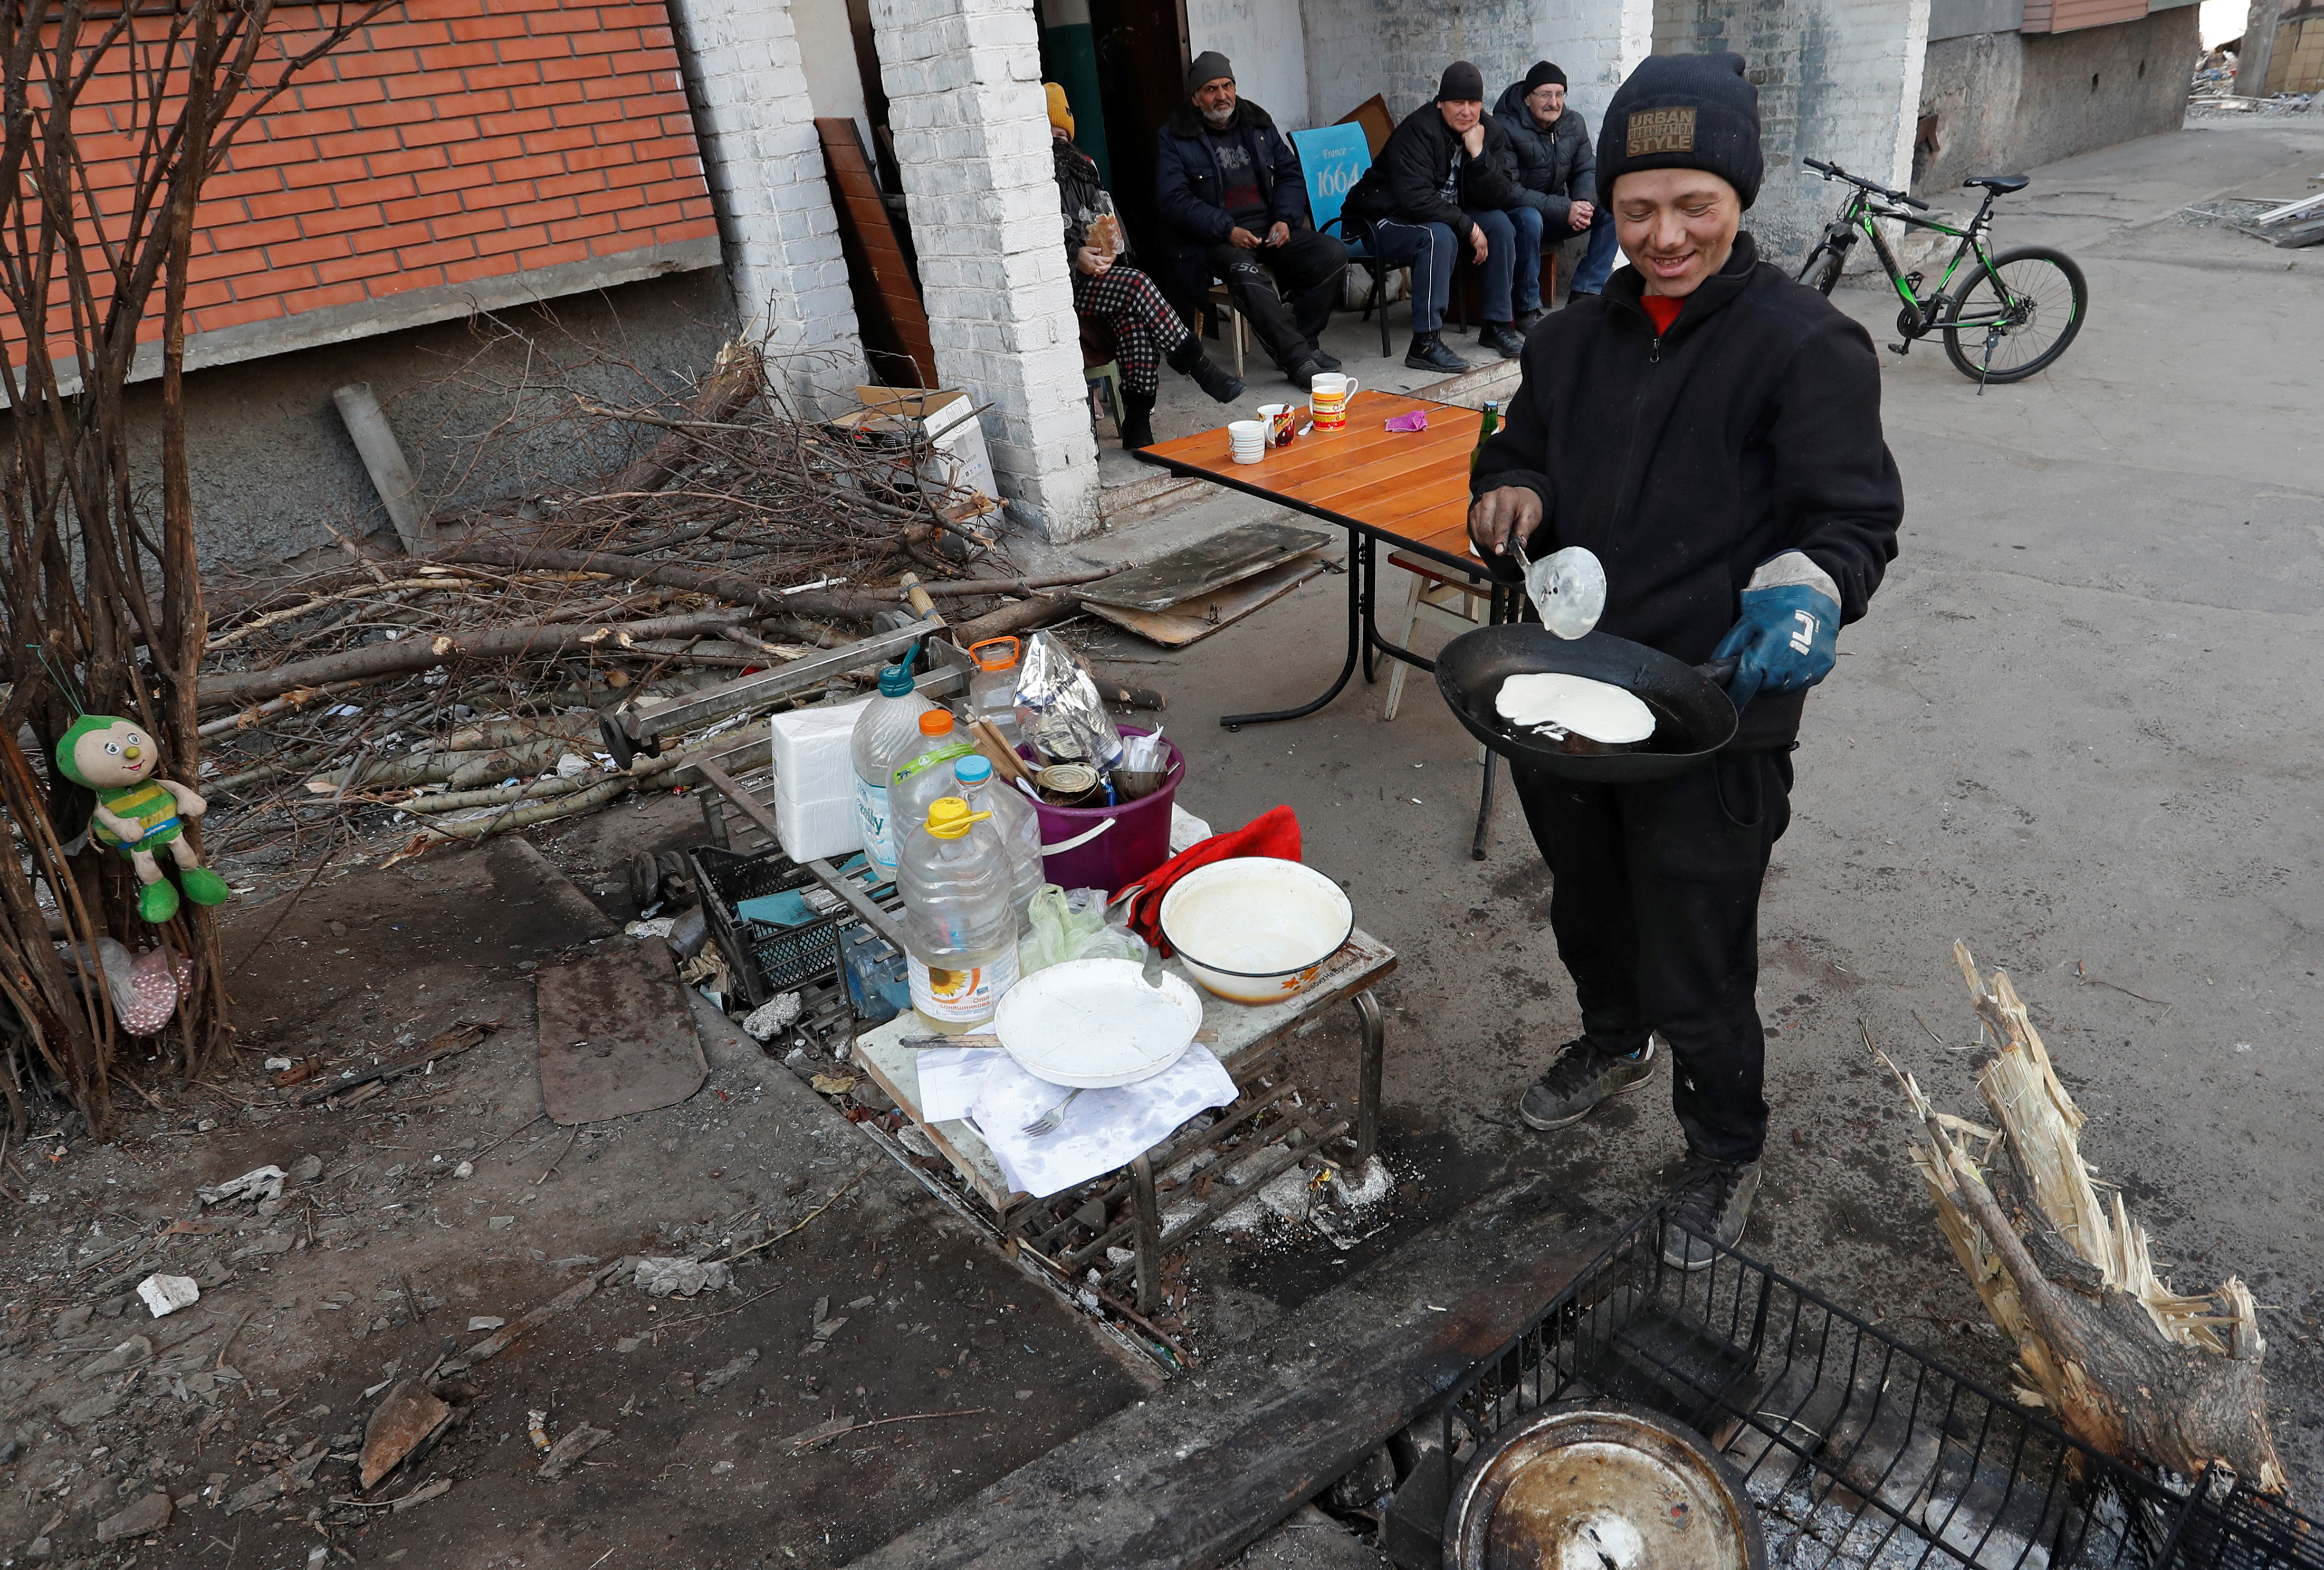 Local resident Yekaterina Lanina cooks pancakes outside an apartment building in Mariupol